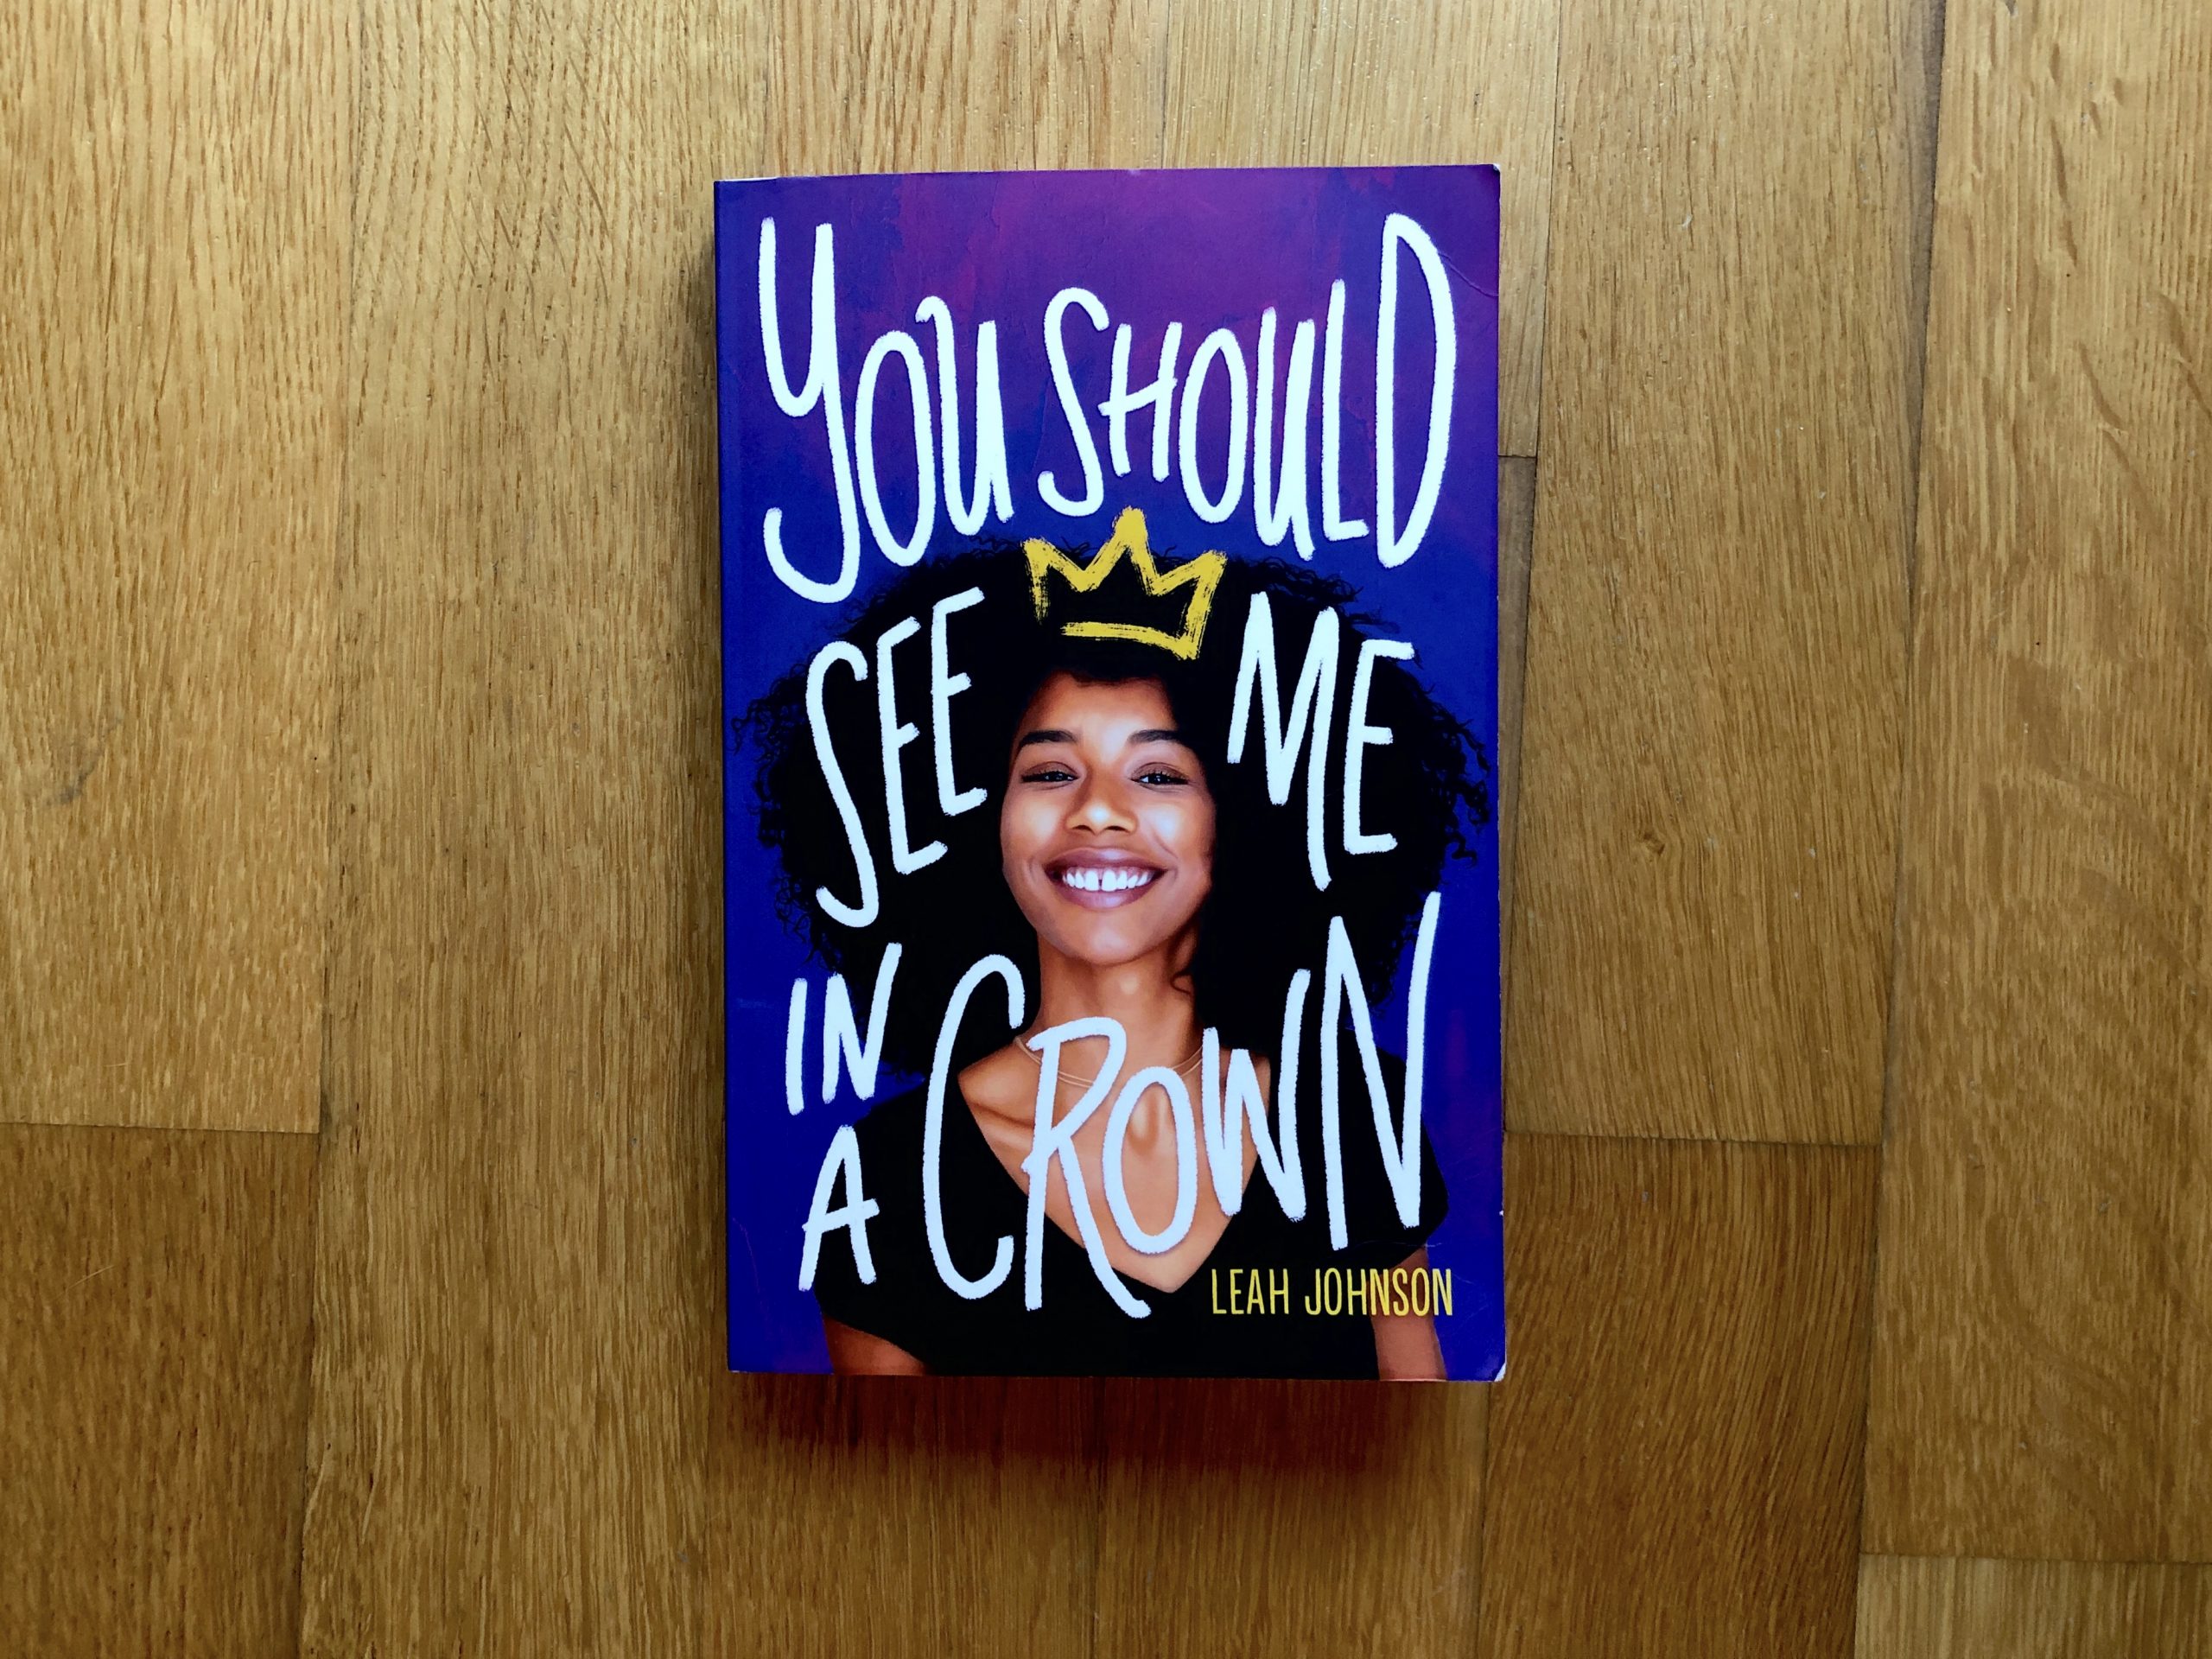 Leah Johnson: You should see me in a crown